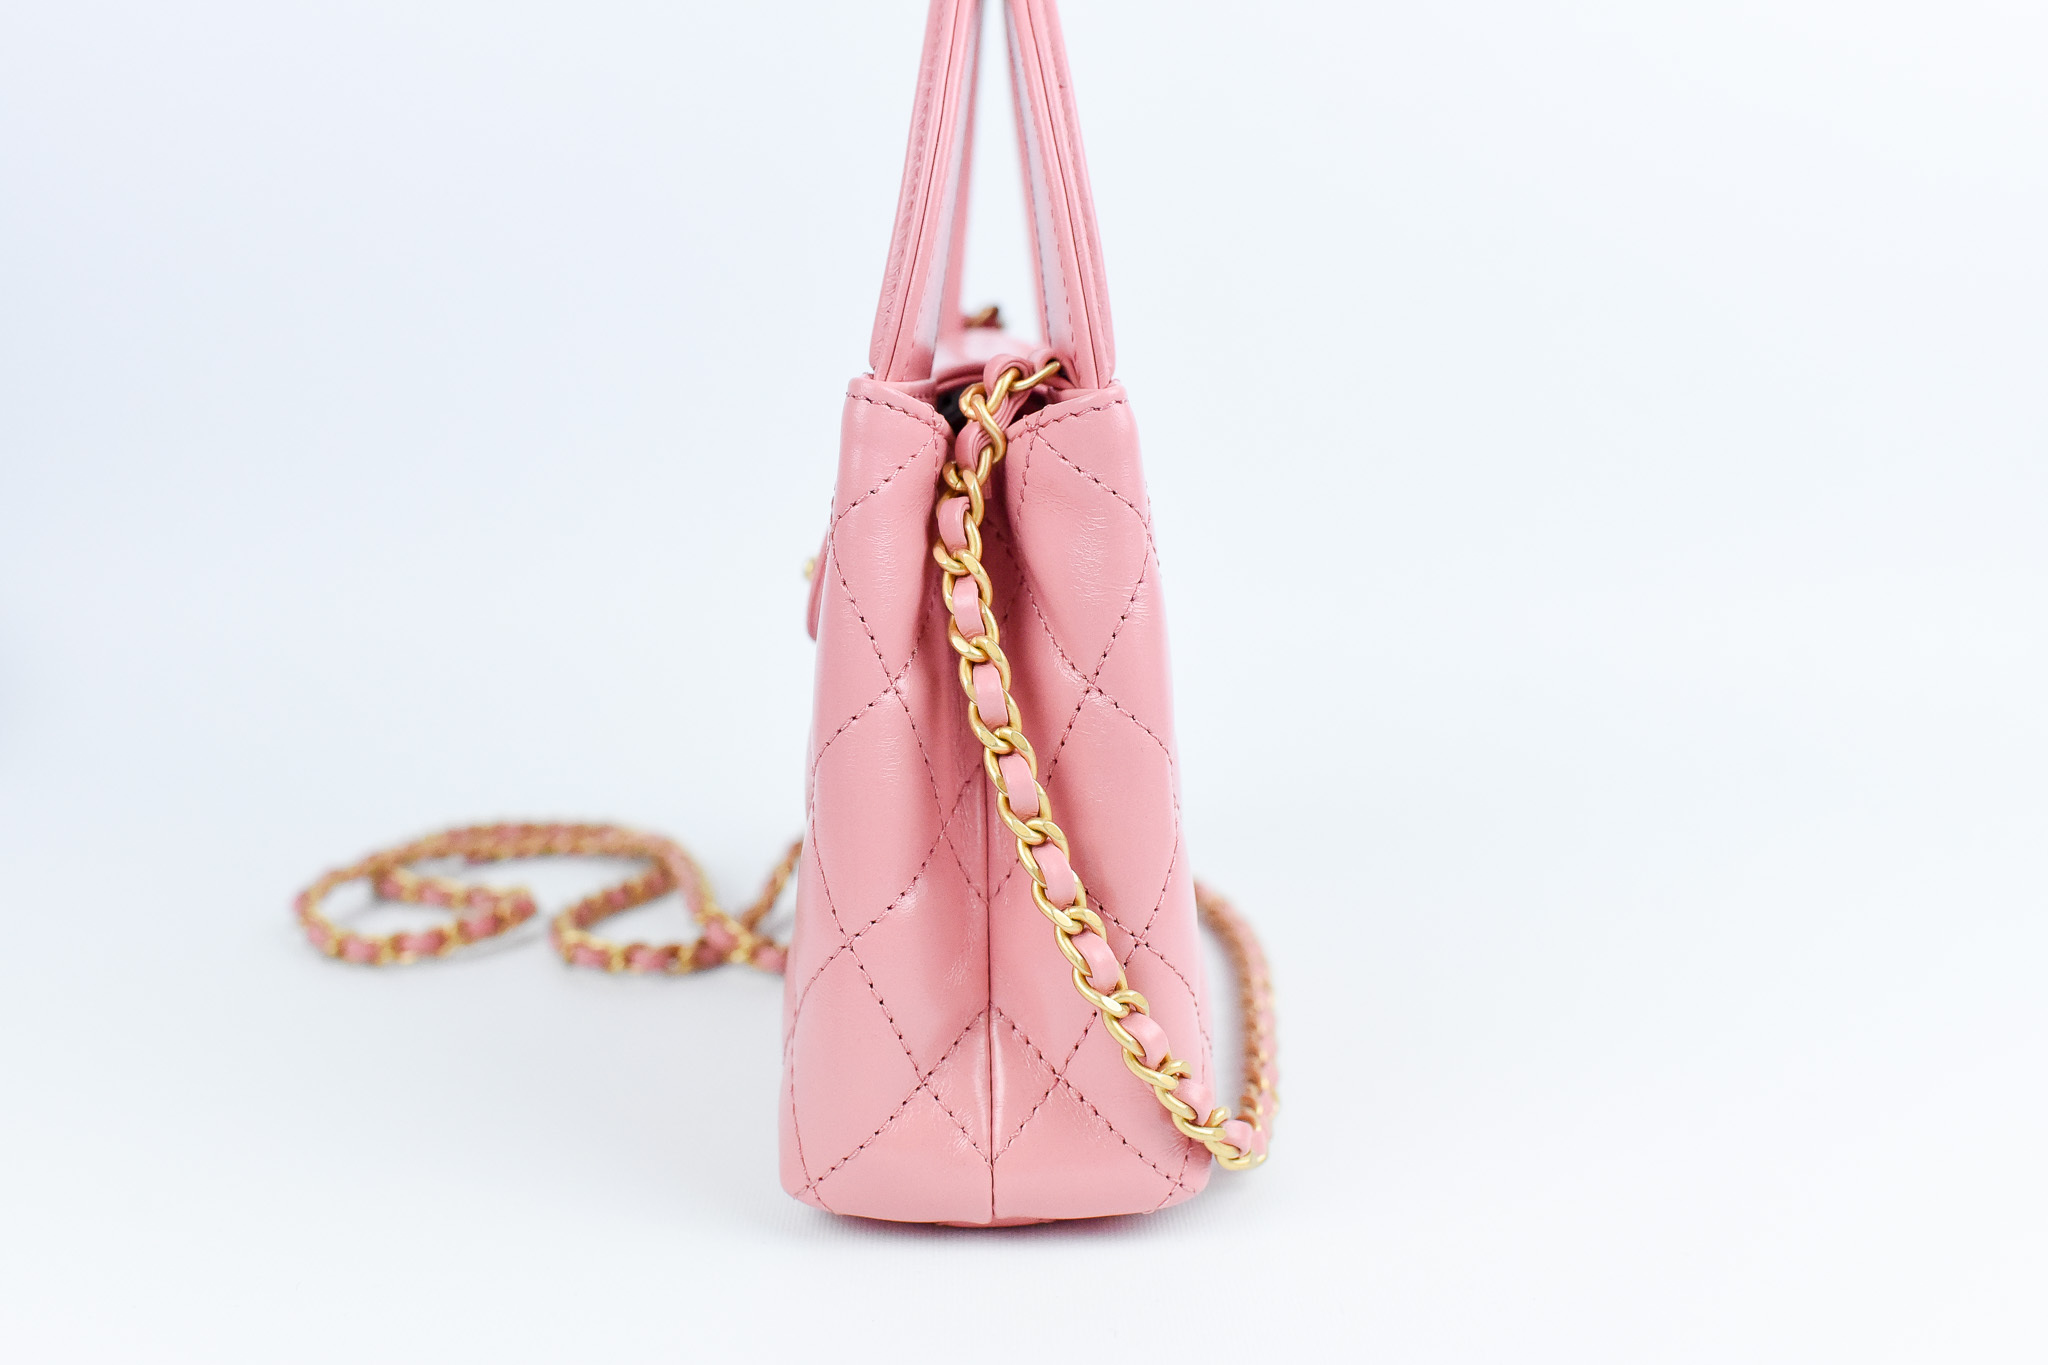 Chanel Kelly Bag Small, Pink Calfskin Leather with Gold Hardware